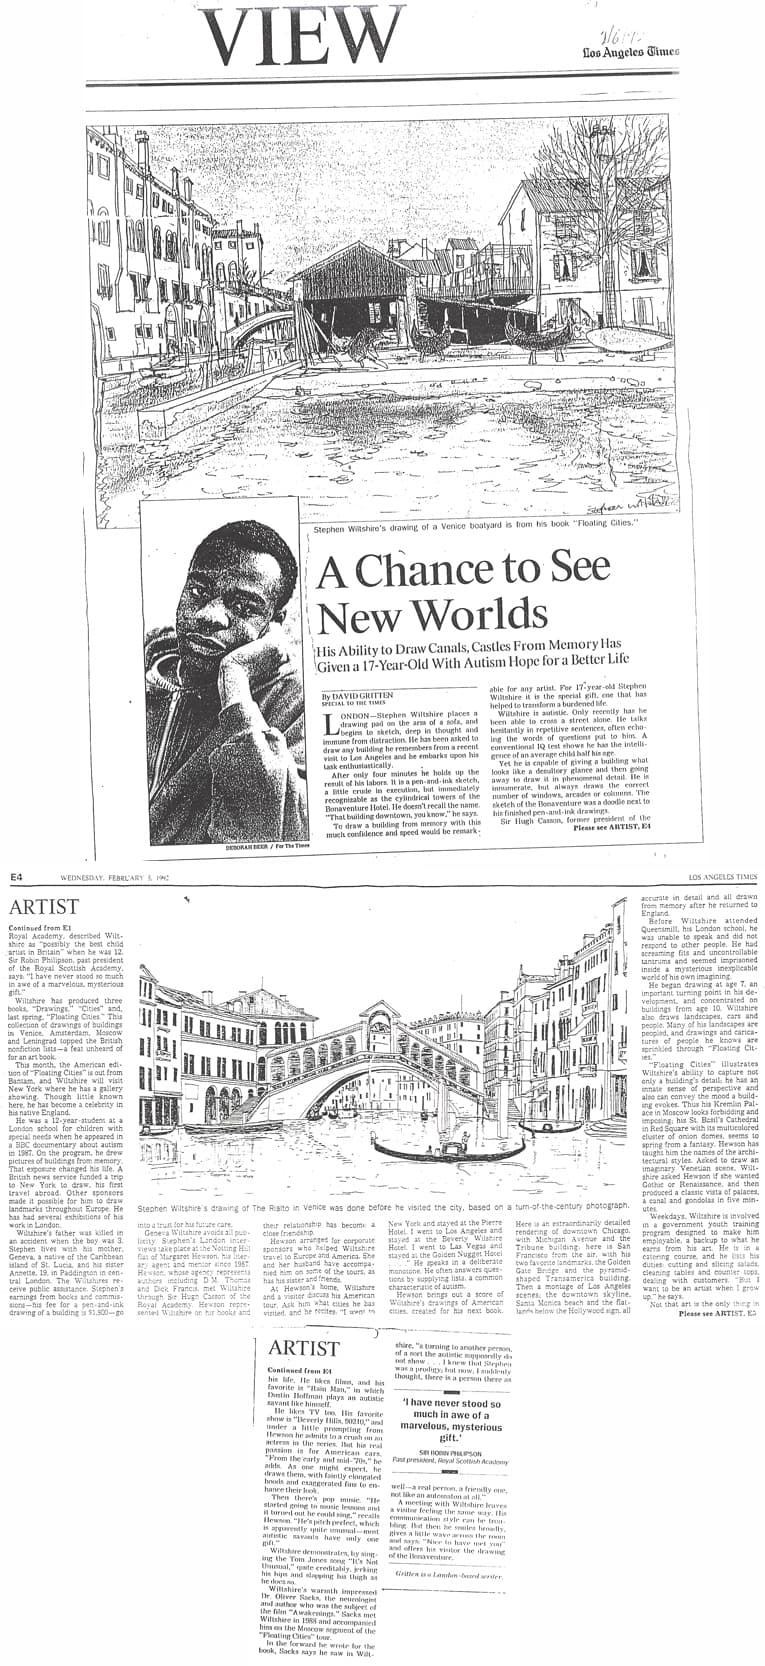 A chance to see new worlds - The Artist's Press Archive